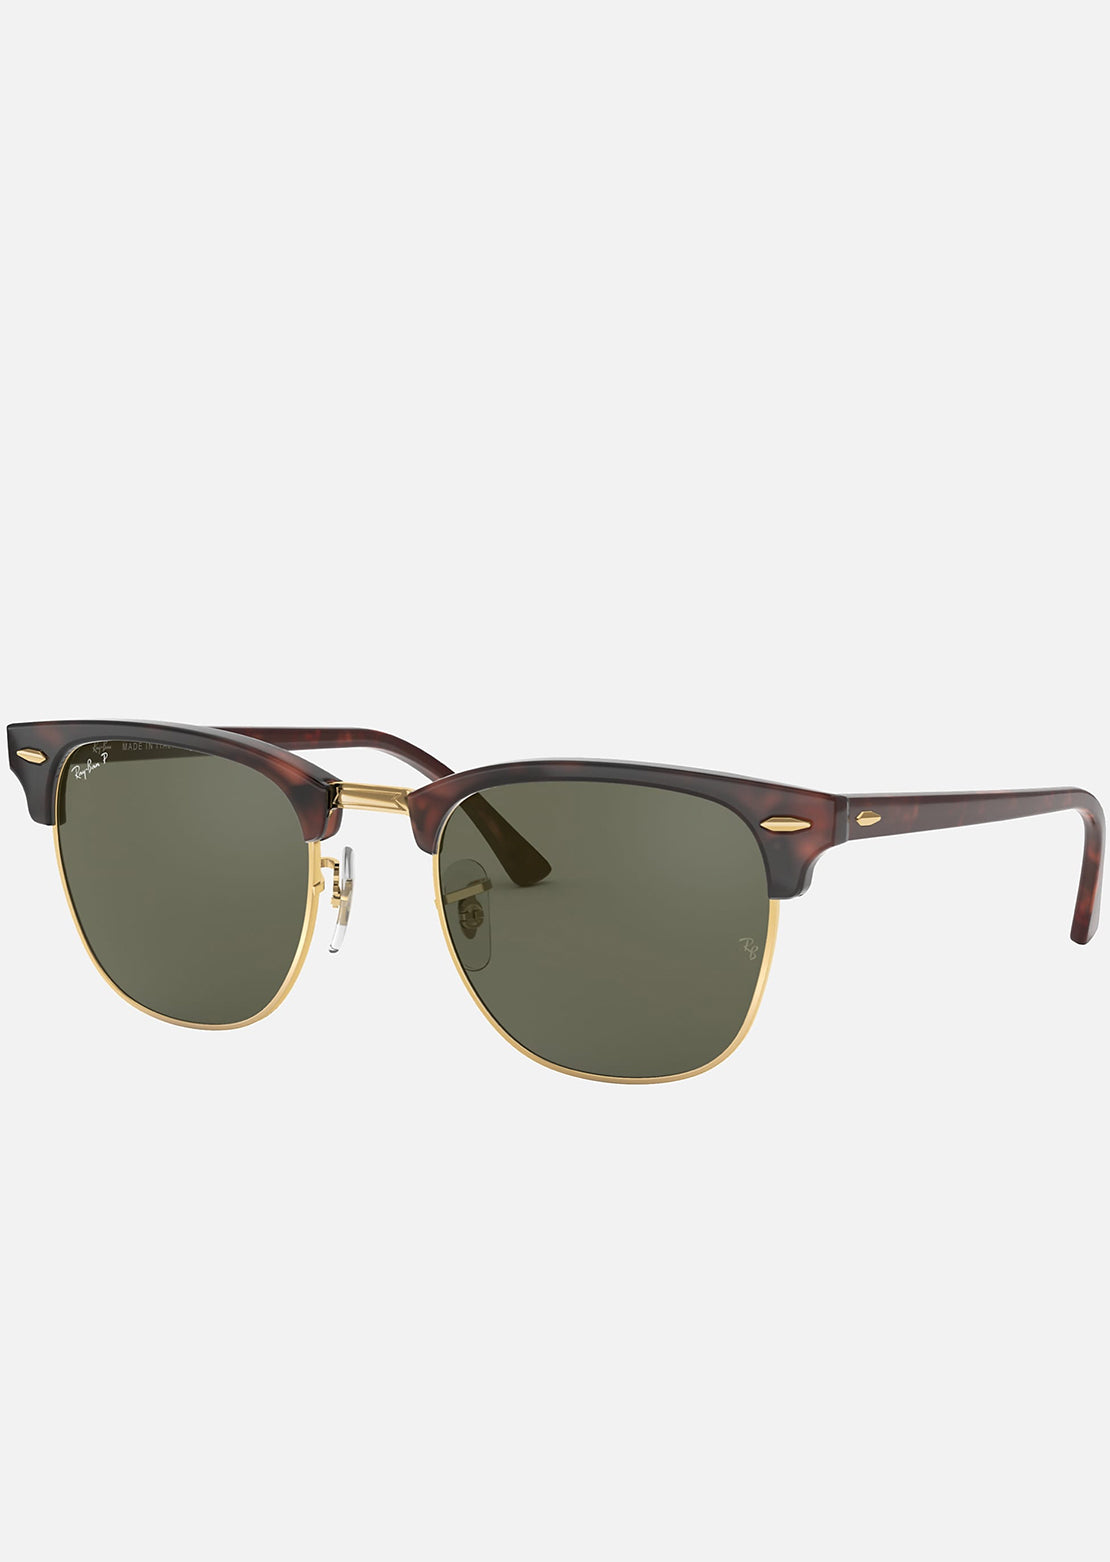 Ray-Ban Clubmaster Classic RB3016 Sunglasses Acetate Tortoise/Green Classic G-15